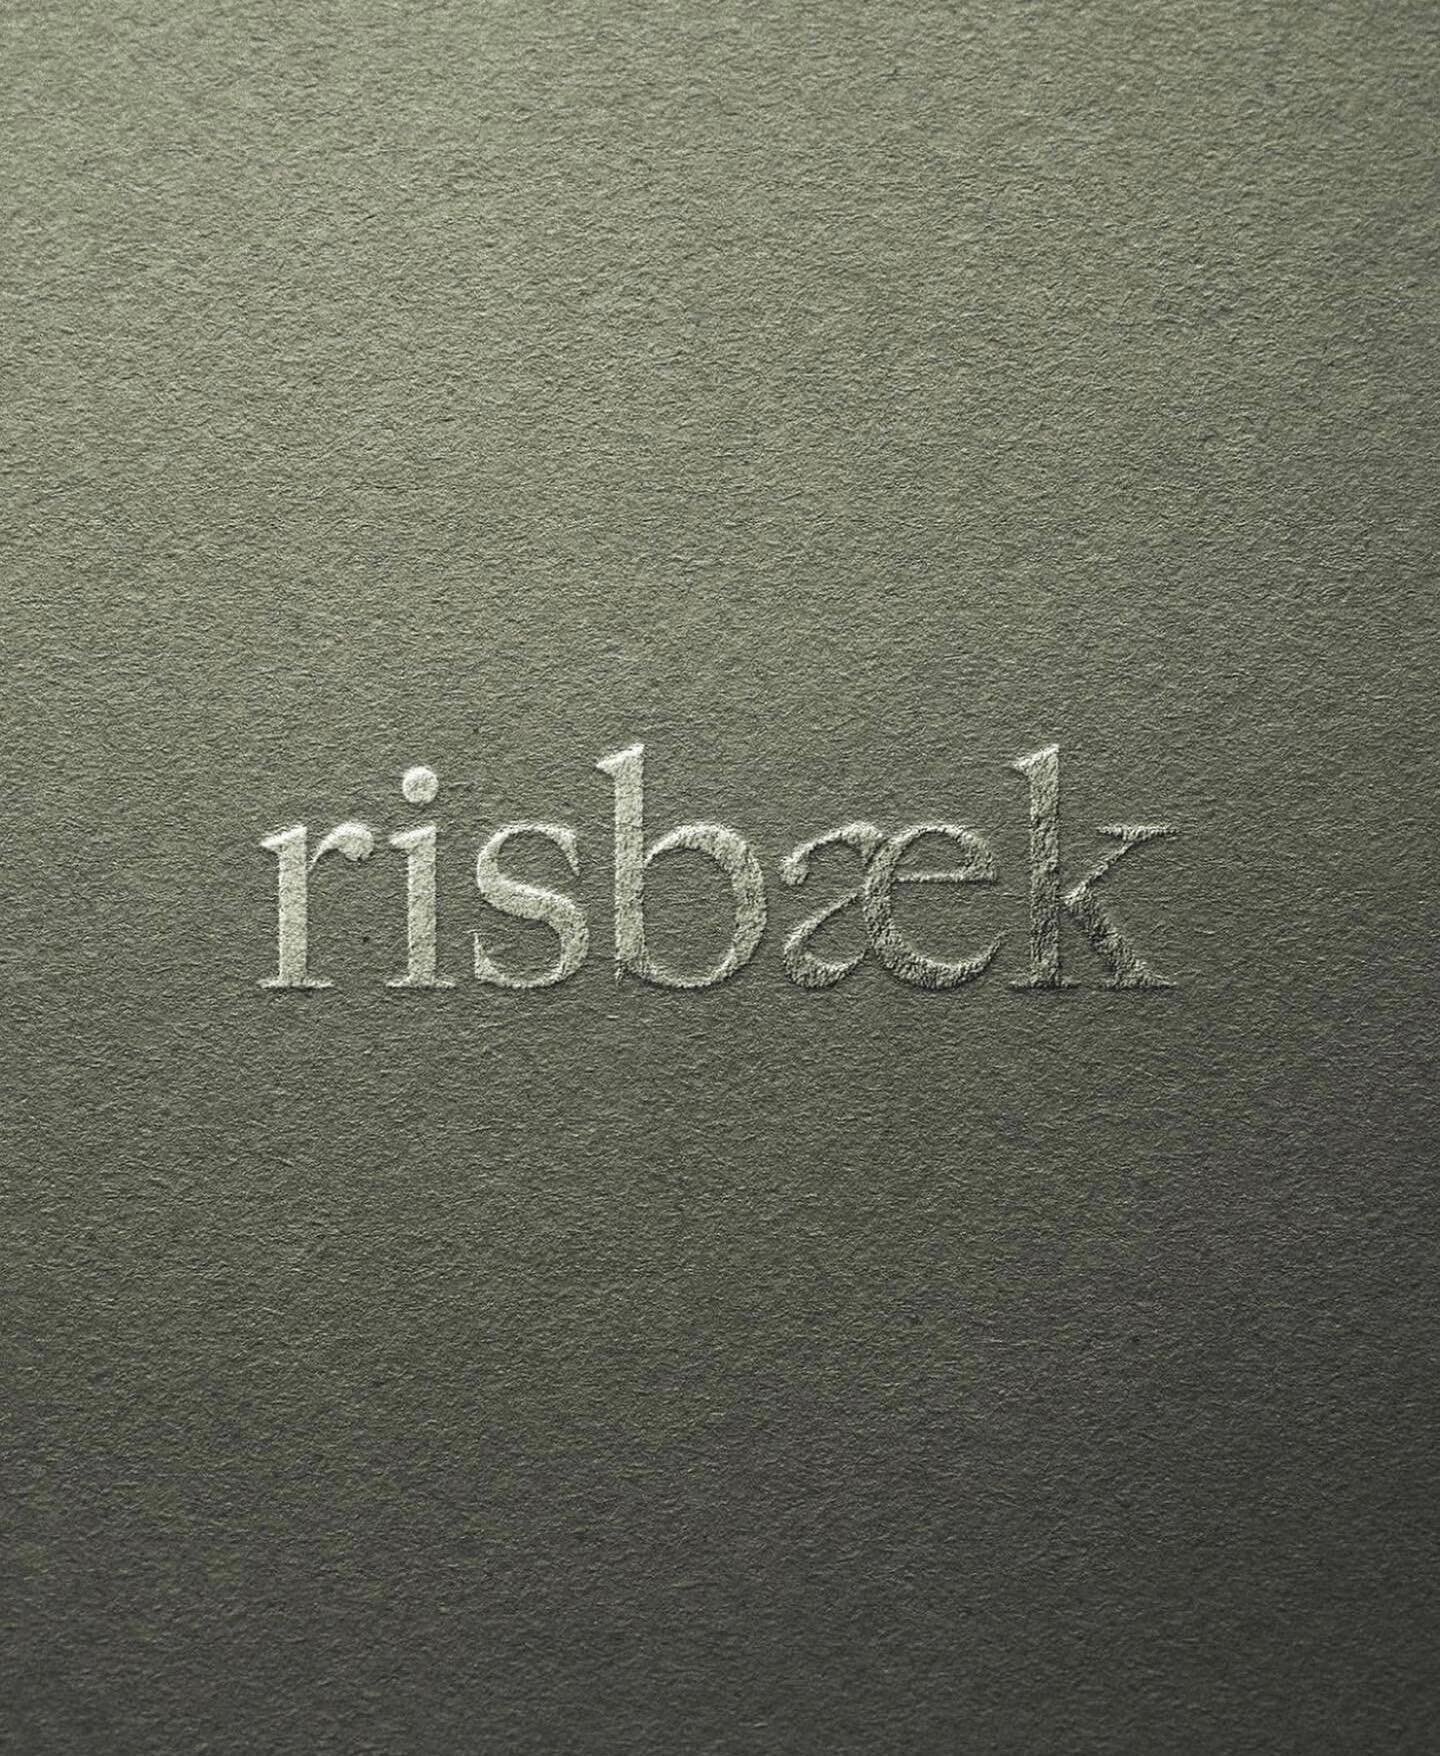 The philosophy of the studio is to define the essential, setting aside all else. This means we design with simplicity and subtlety, making the space feel respectful of how we live and what we need. 

Visit www.metterisbaek.dk to learn more about Risb